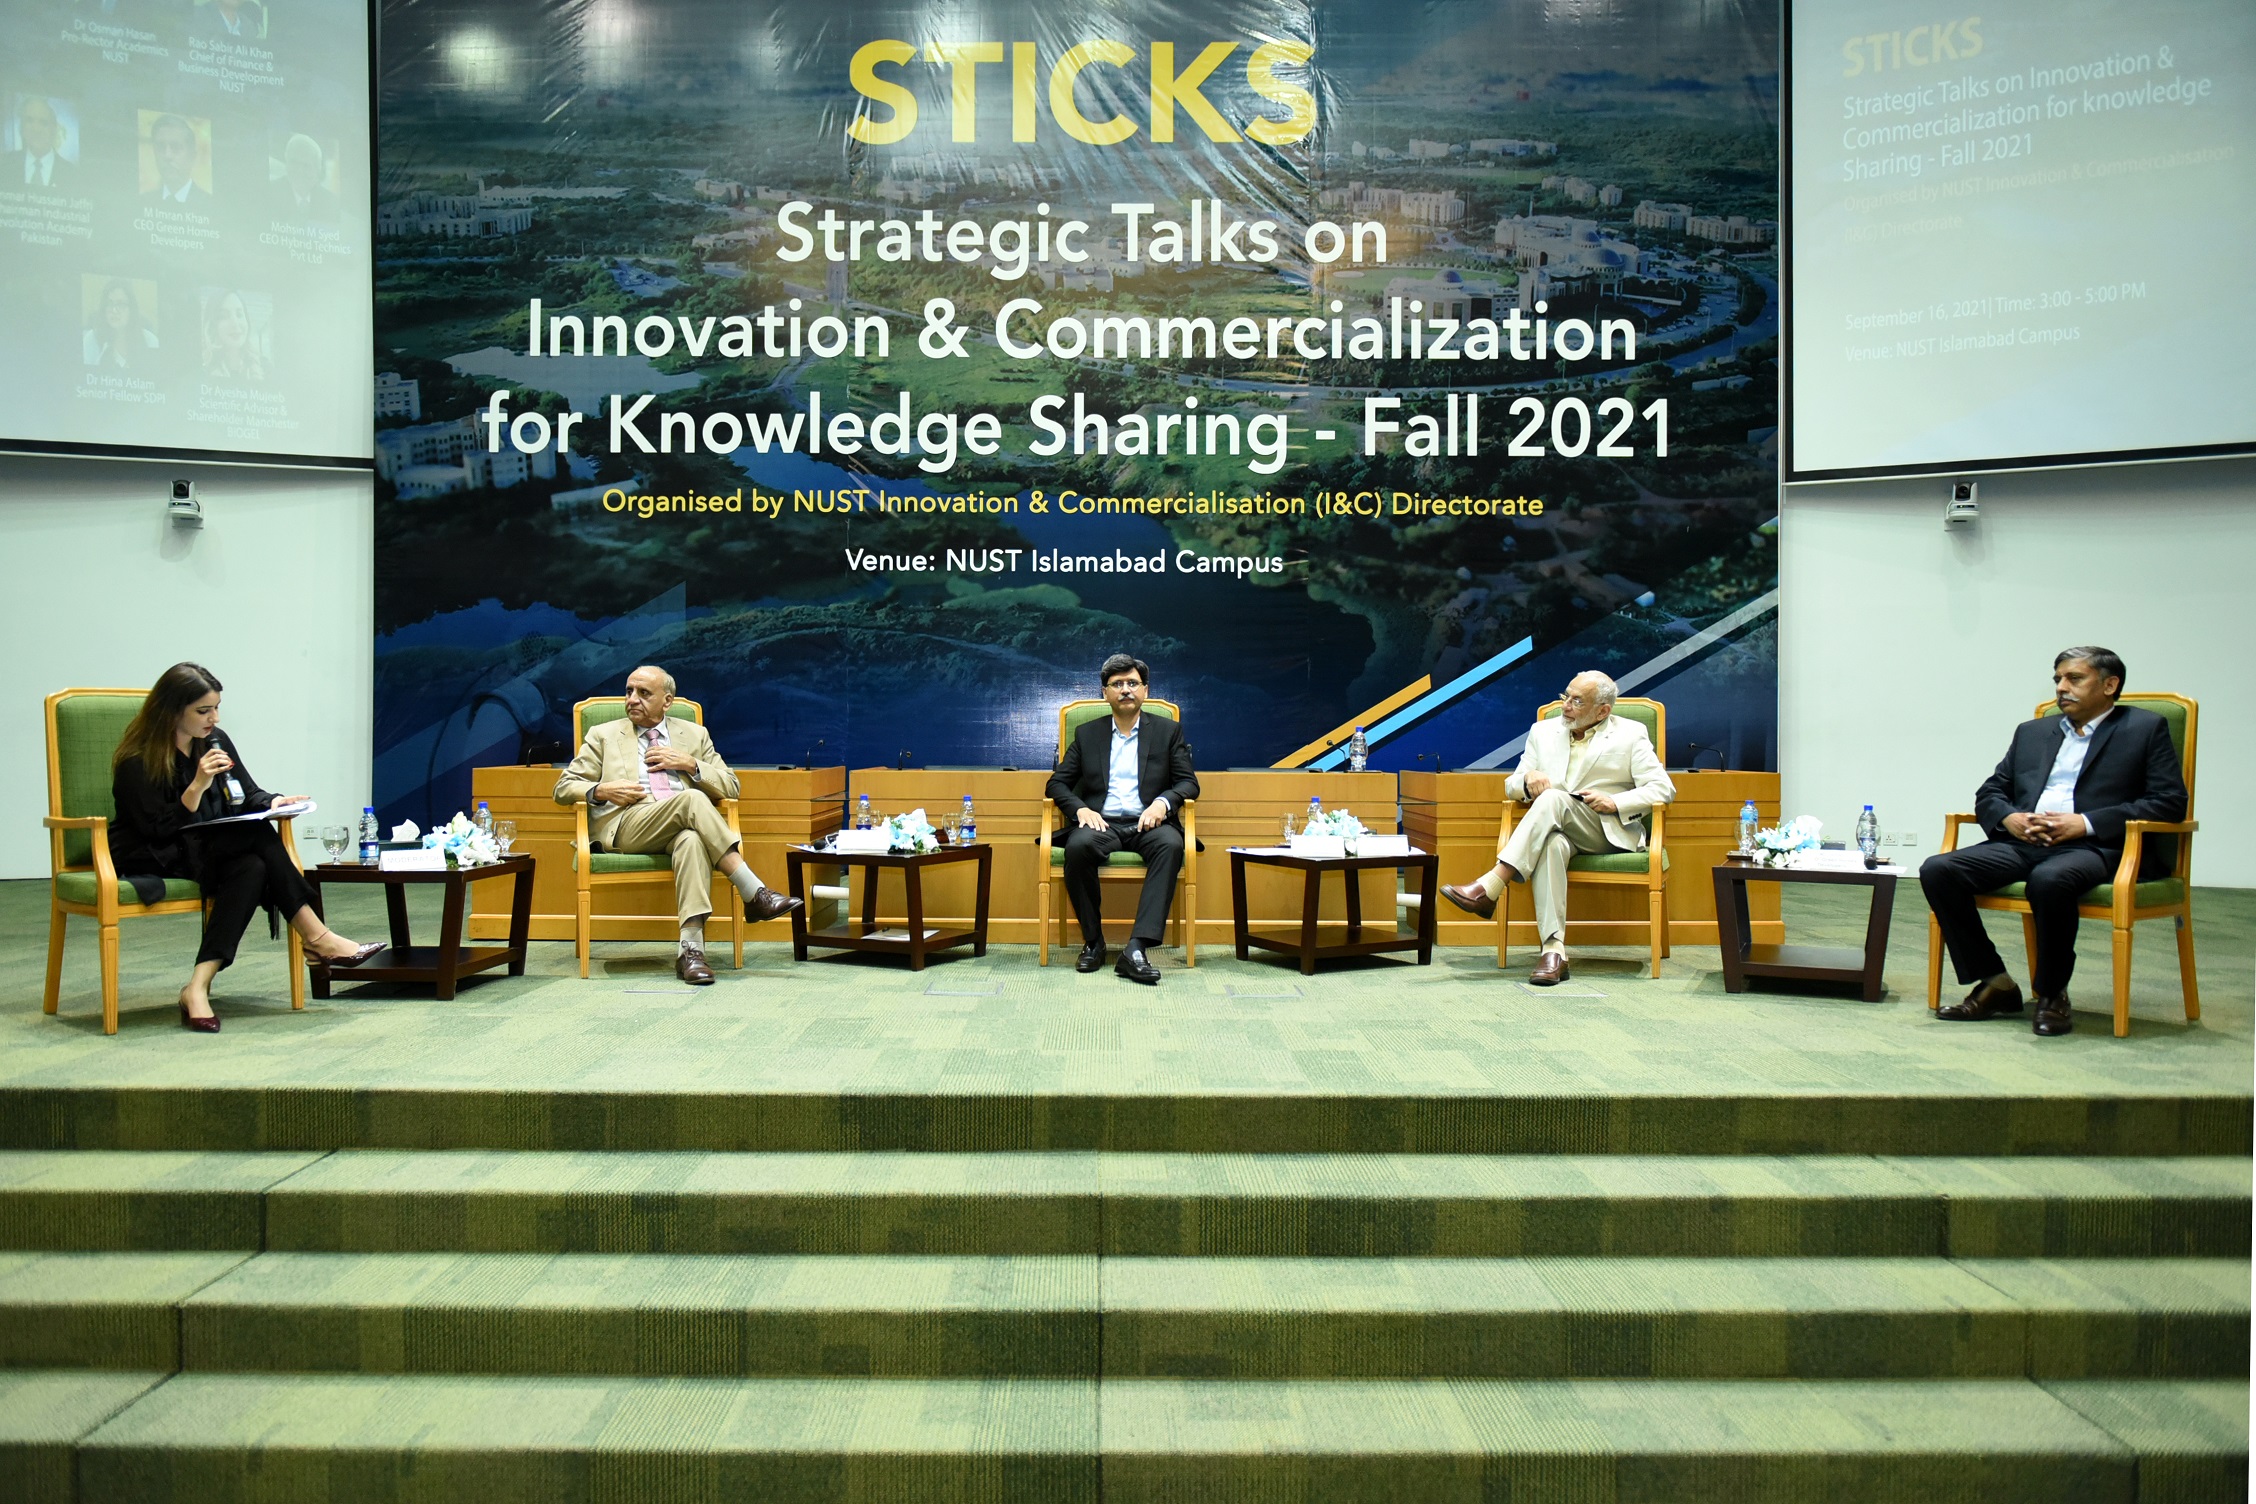 STICKS - Strategic Talks on Innovation & Commercialization for Knowledge Sharing - Fall 2021_2